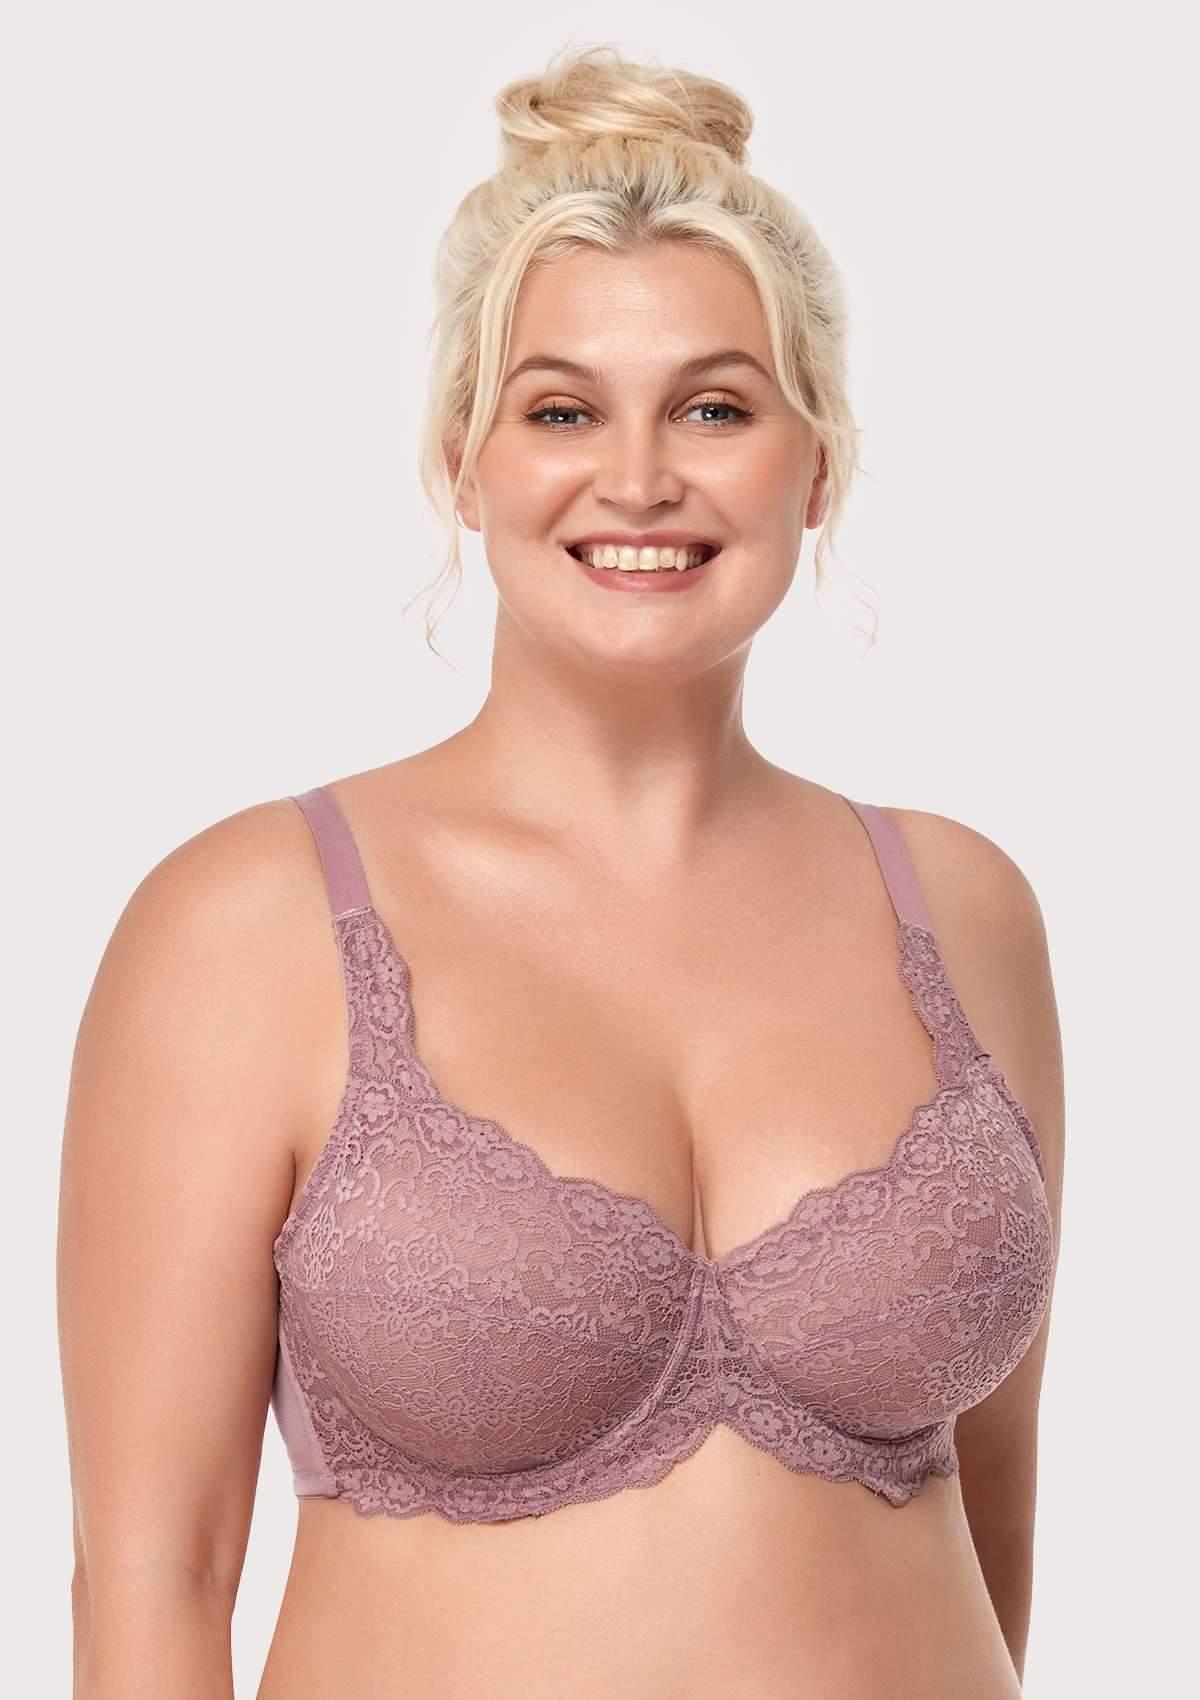 HSIA All-Over Floral Lace Unlined Bra: Minimizer Bra For Heavy Breasts - Purple / 34 / D